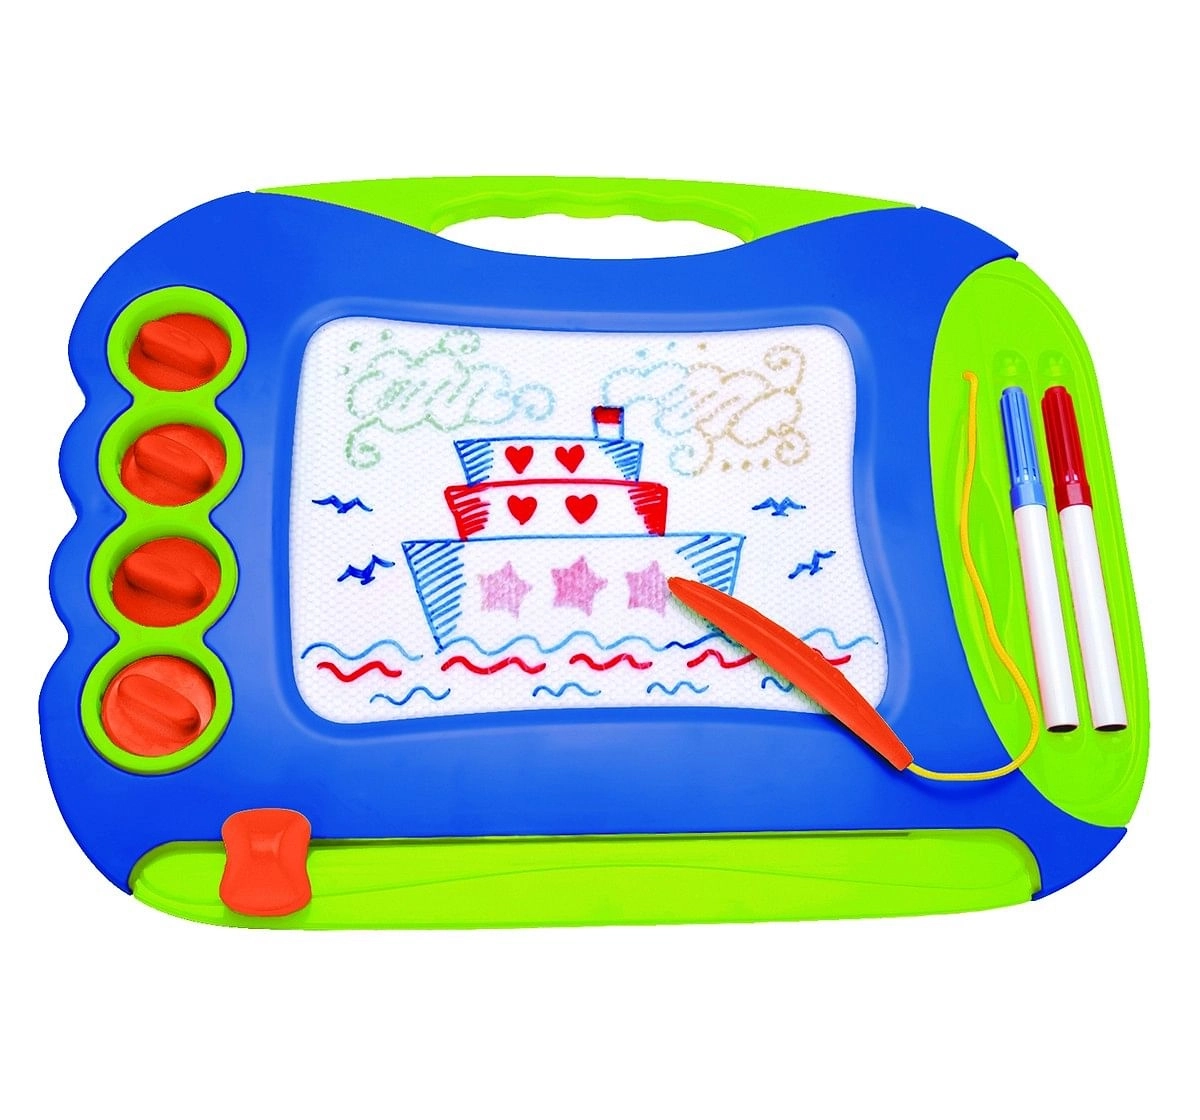 Youreka 2 in 1 Magic Writer - Blue Activity Table & Boards for Kids age 18M + (Pink)